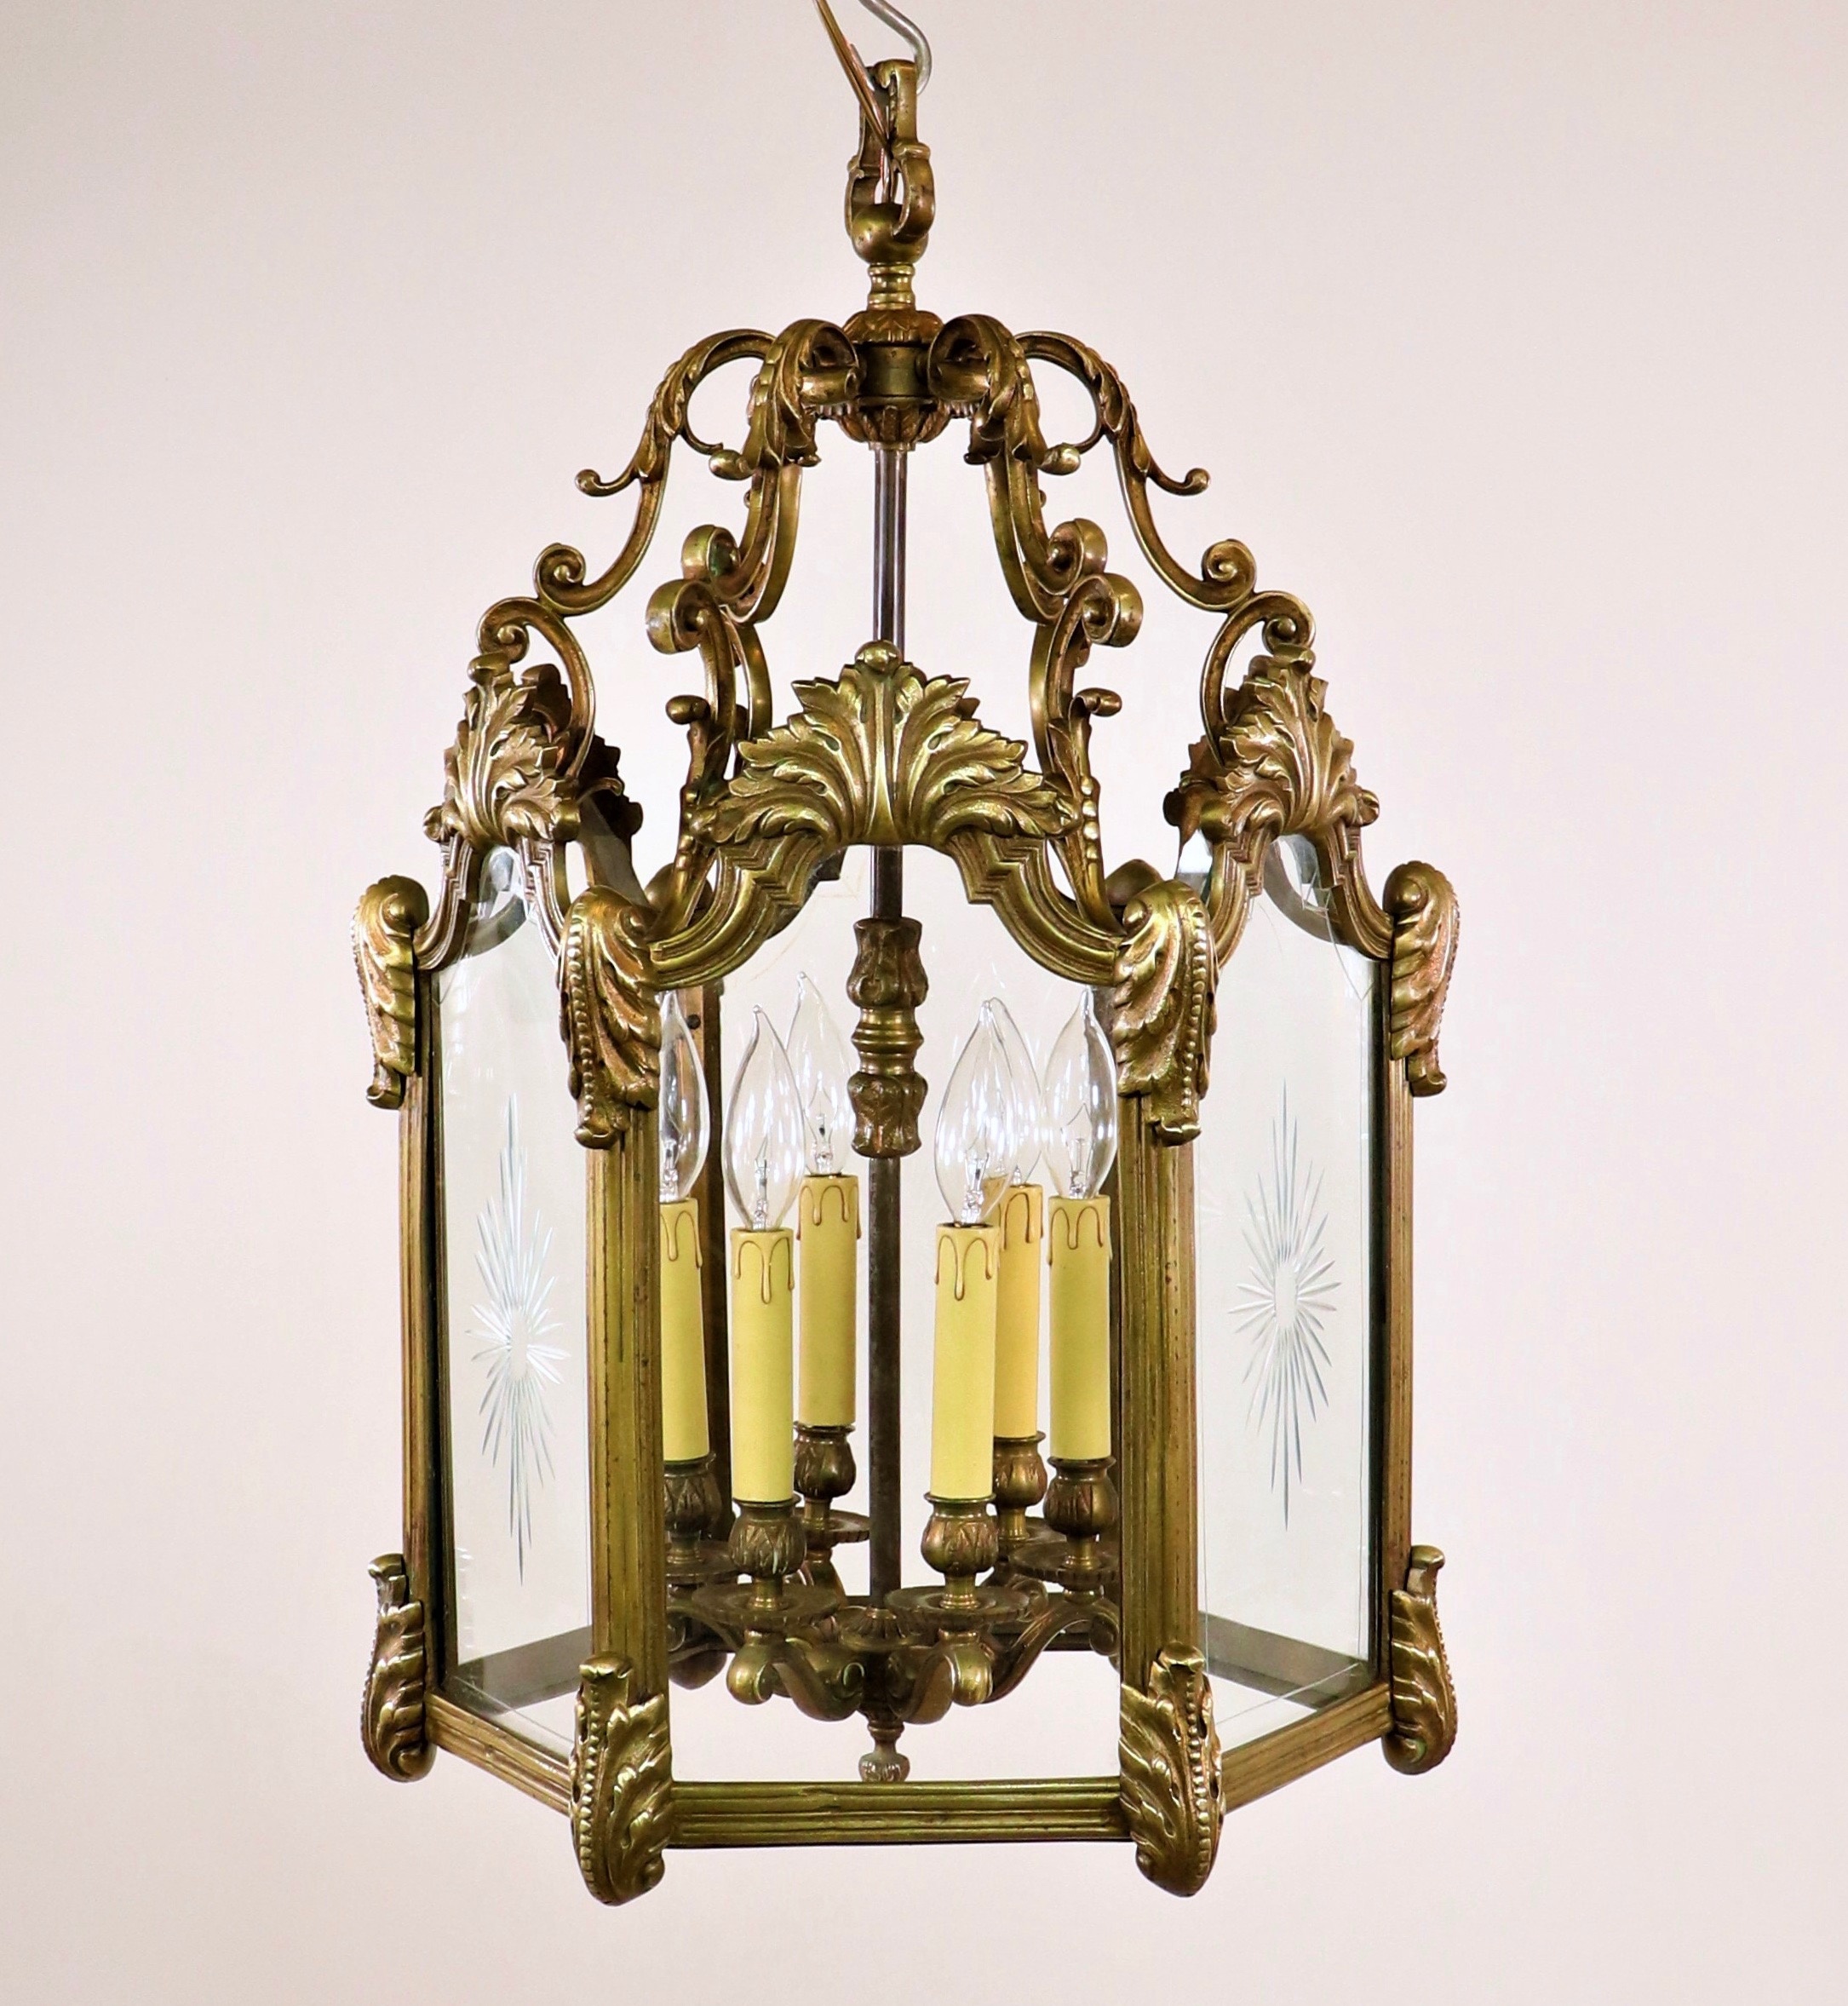 Circa 1800 French Louis XIV Bronze Lantern With Cut Glass Panels Antiques Resources, Chicago